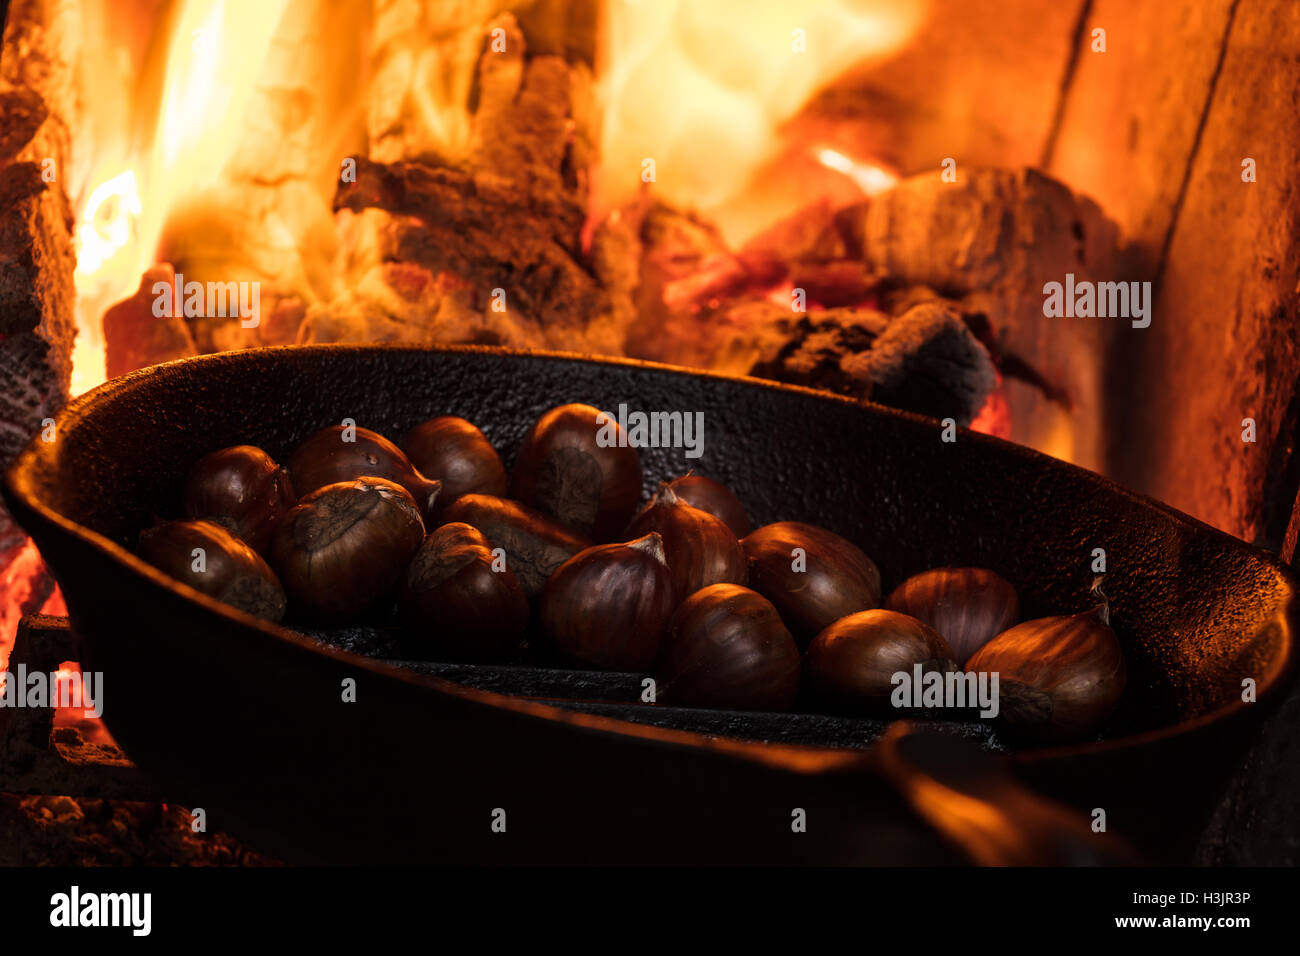 Hong Kong Street Food Roasted Chestnuts In Chinese Brass Pan Or Wok On A  Stove Over Hot Black Stone Stock Photo - Download Image Now - iStock